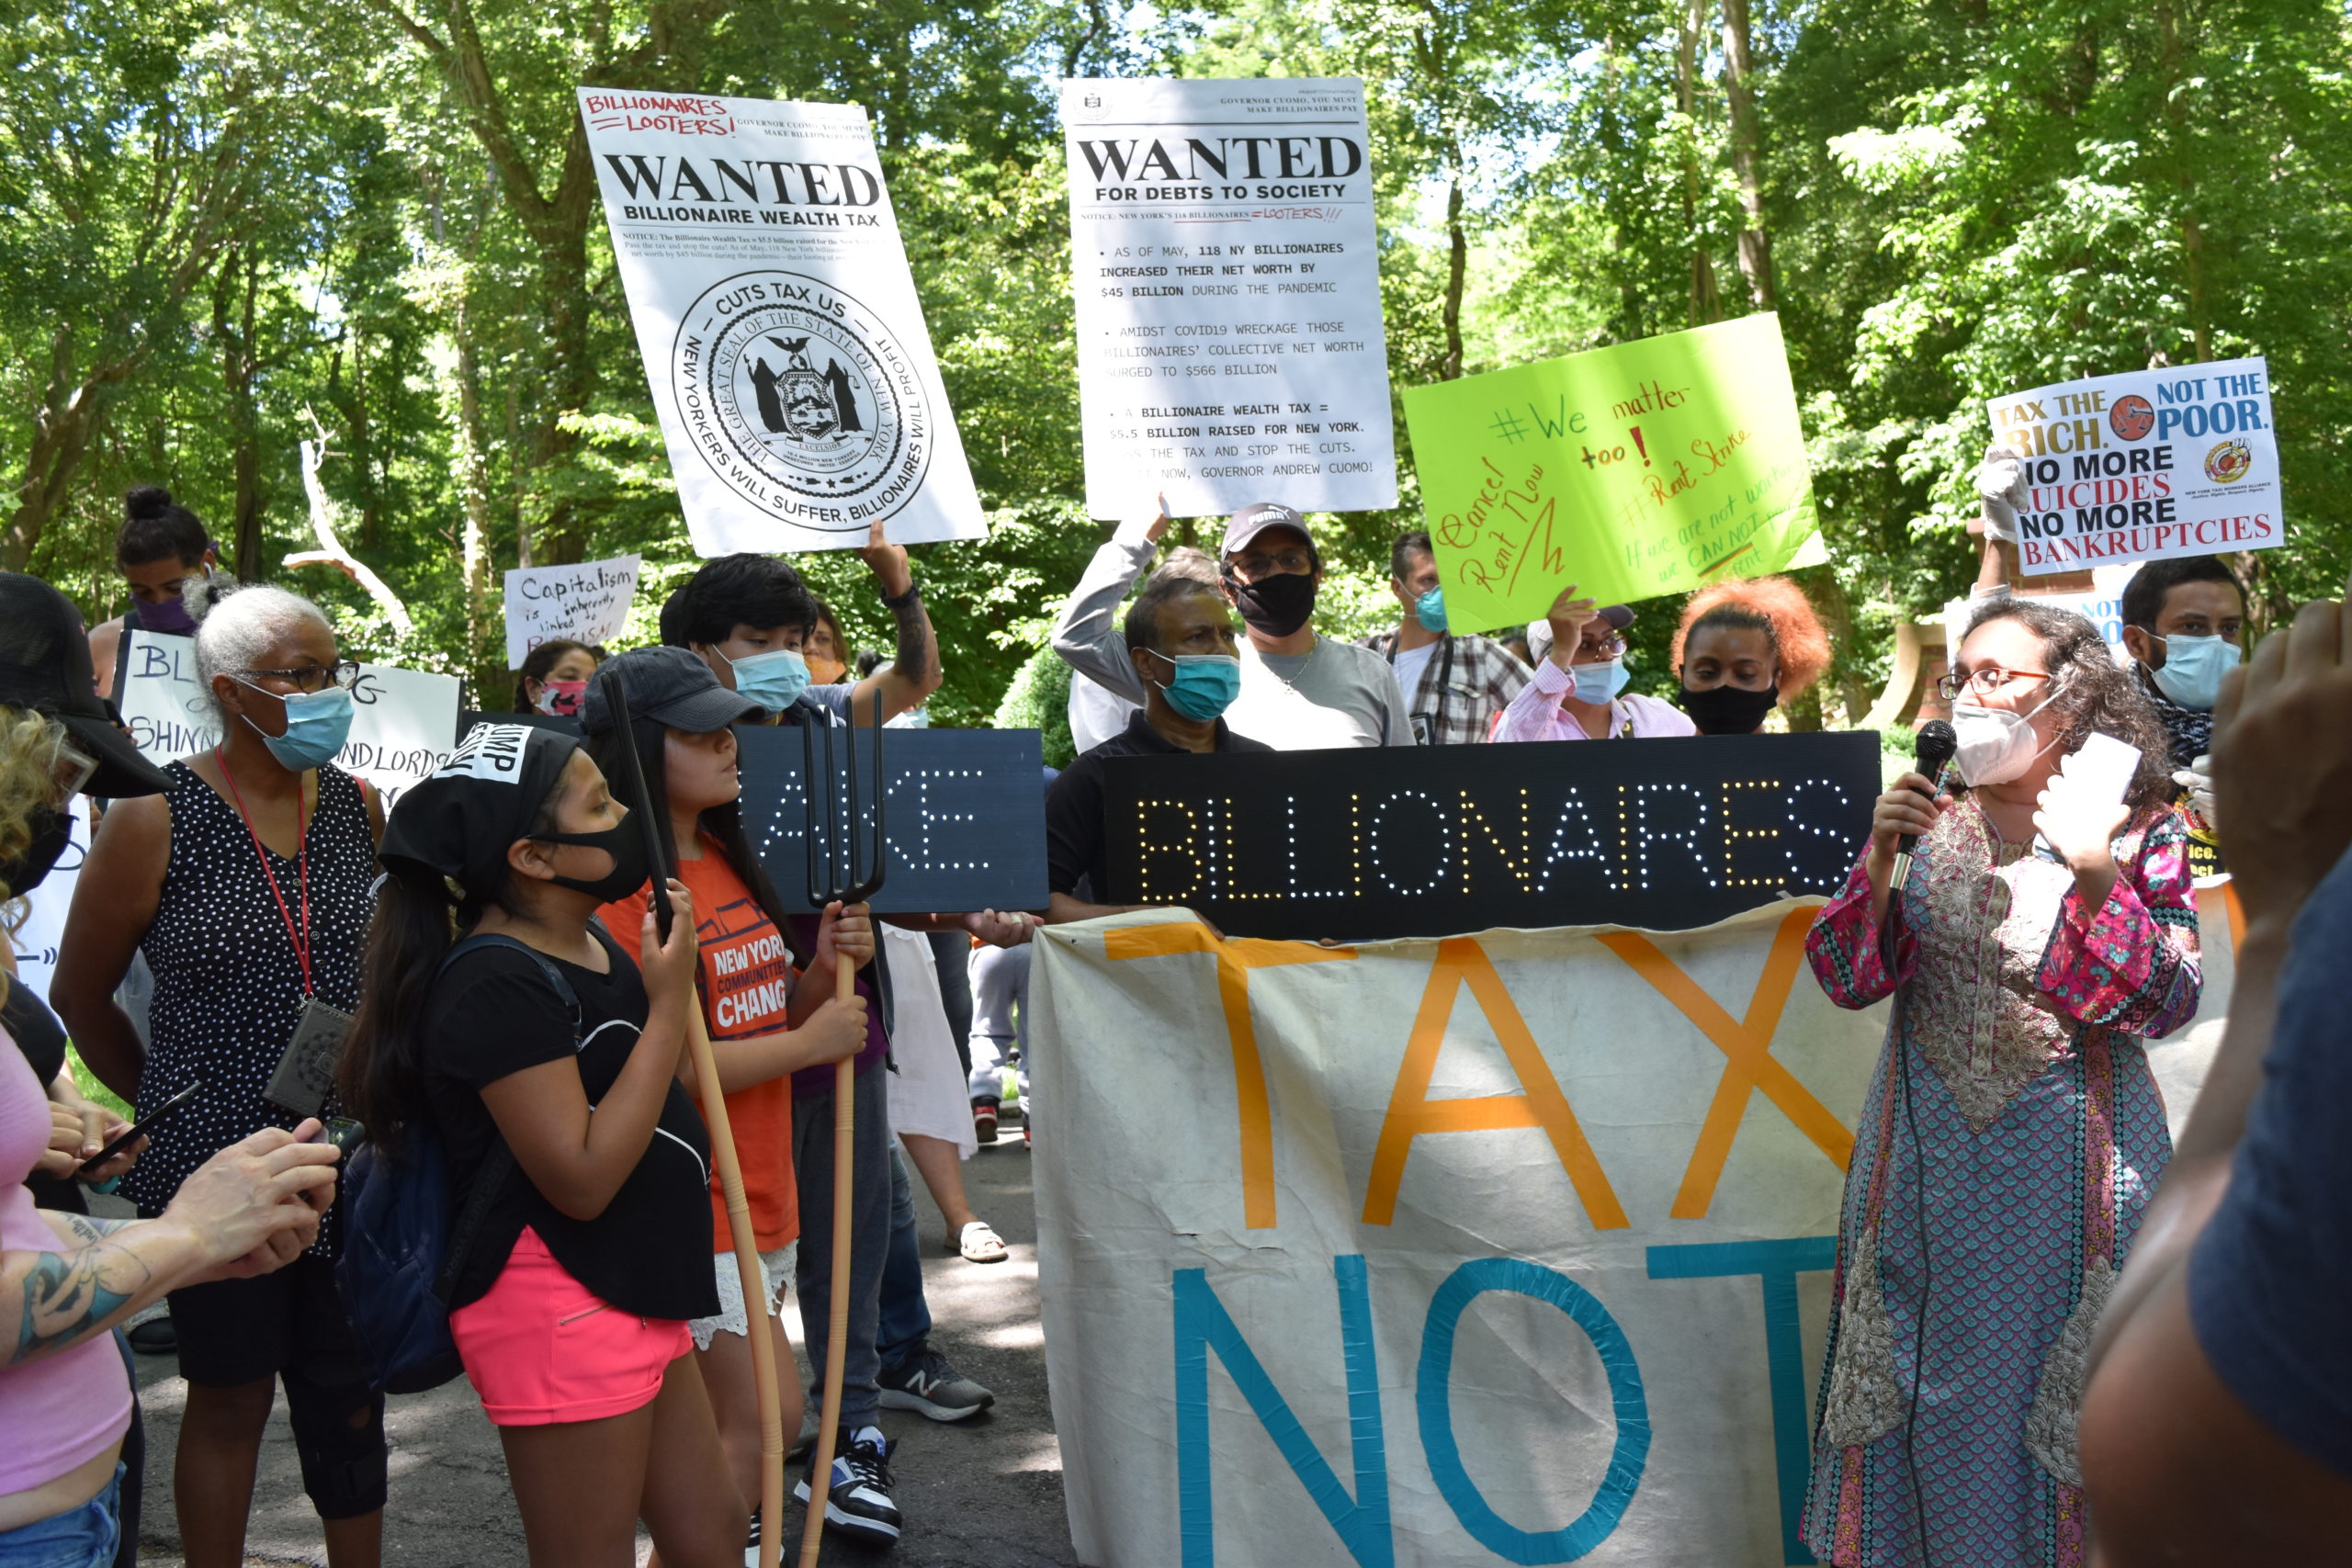 A protest caravan descened on the homes of East End billionaires, incluing the home of former New York City Mayor Michael Bloomberg, Wednesday with demonstrators demanding that Gov. Andrew Cuomo implement a wealth tax. 